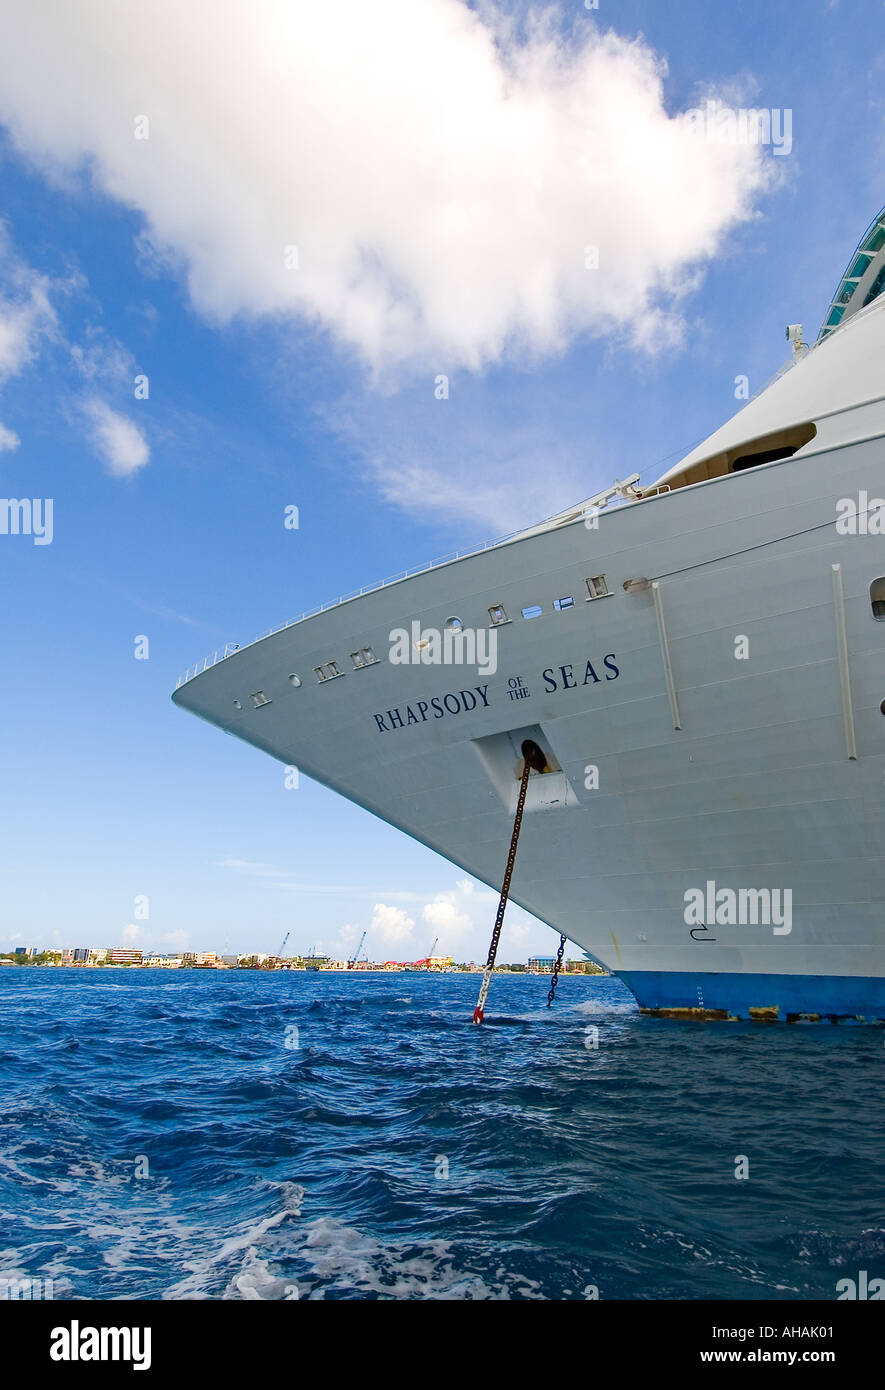 The Royal Caribbean Rhapsody of Seas A Vision Class ship moored in Grand Cayman Stock Photo